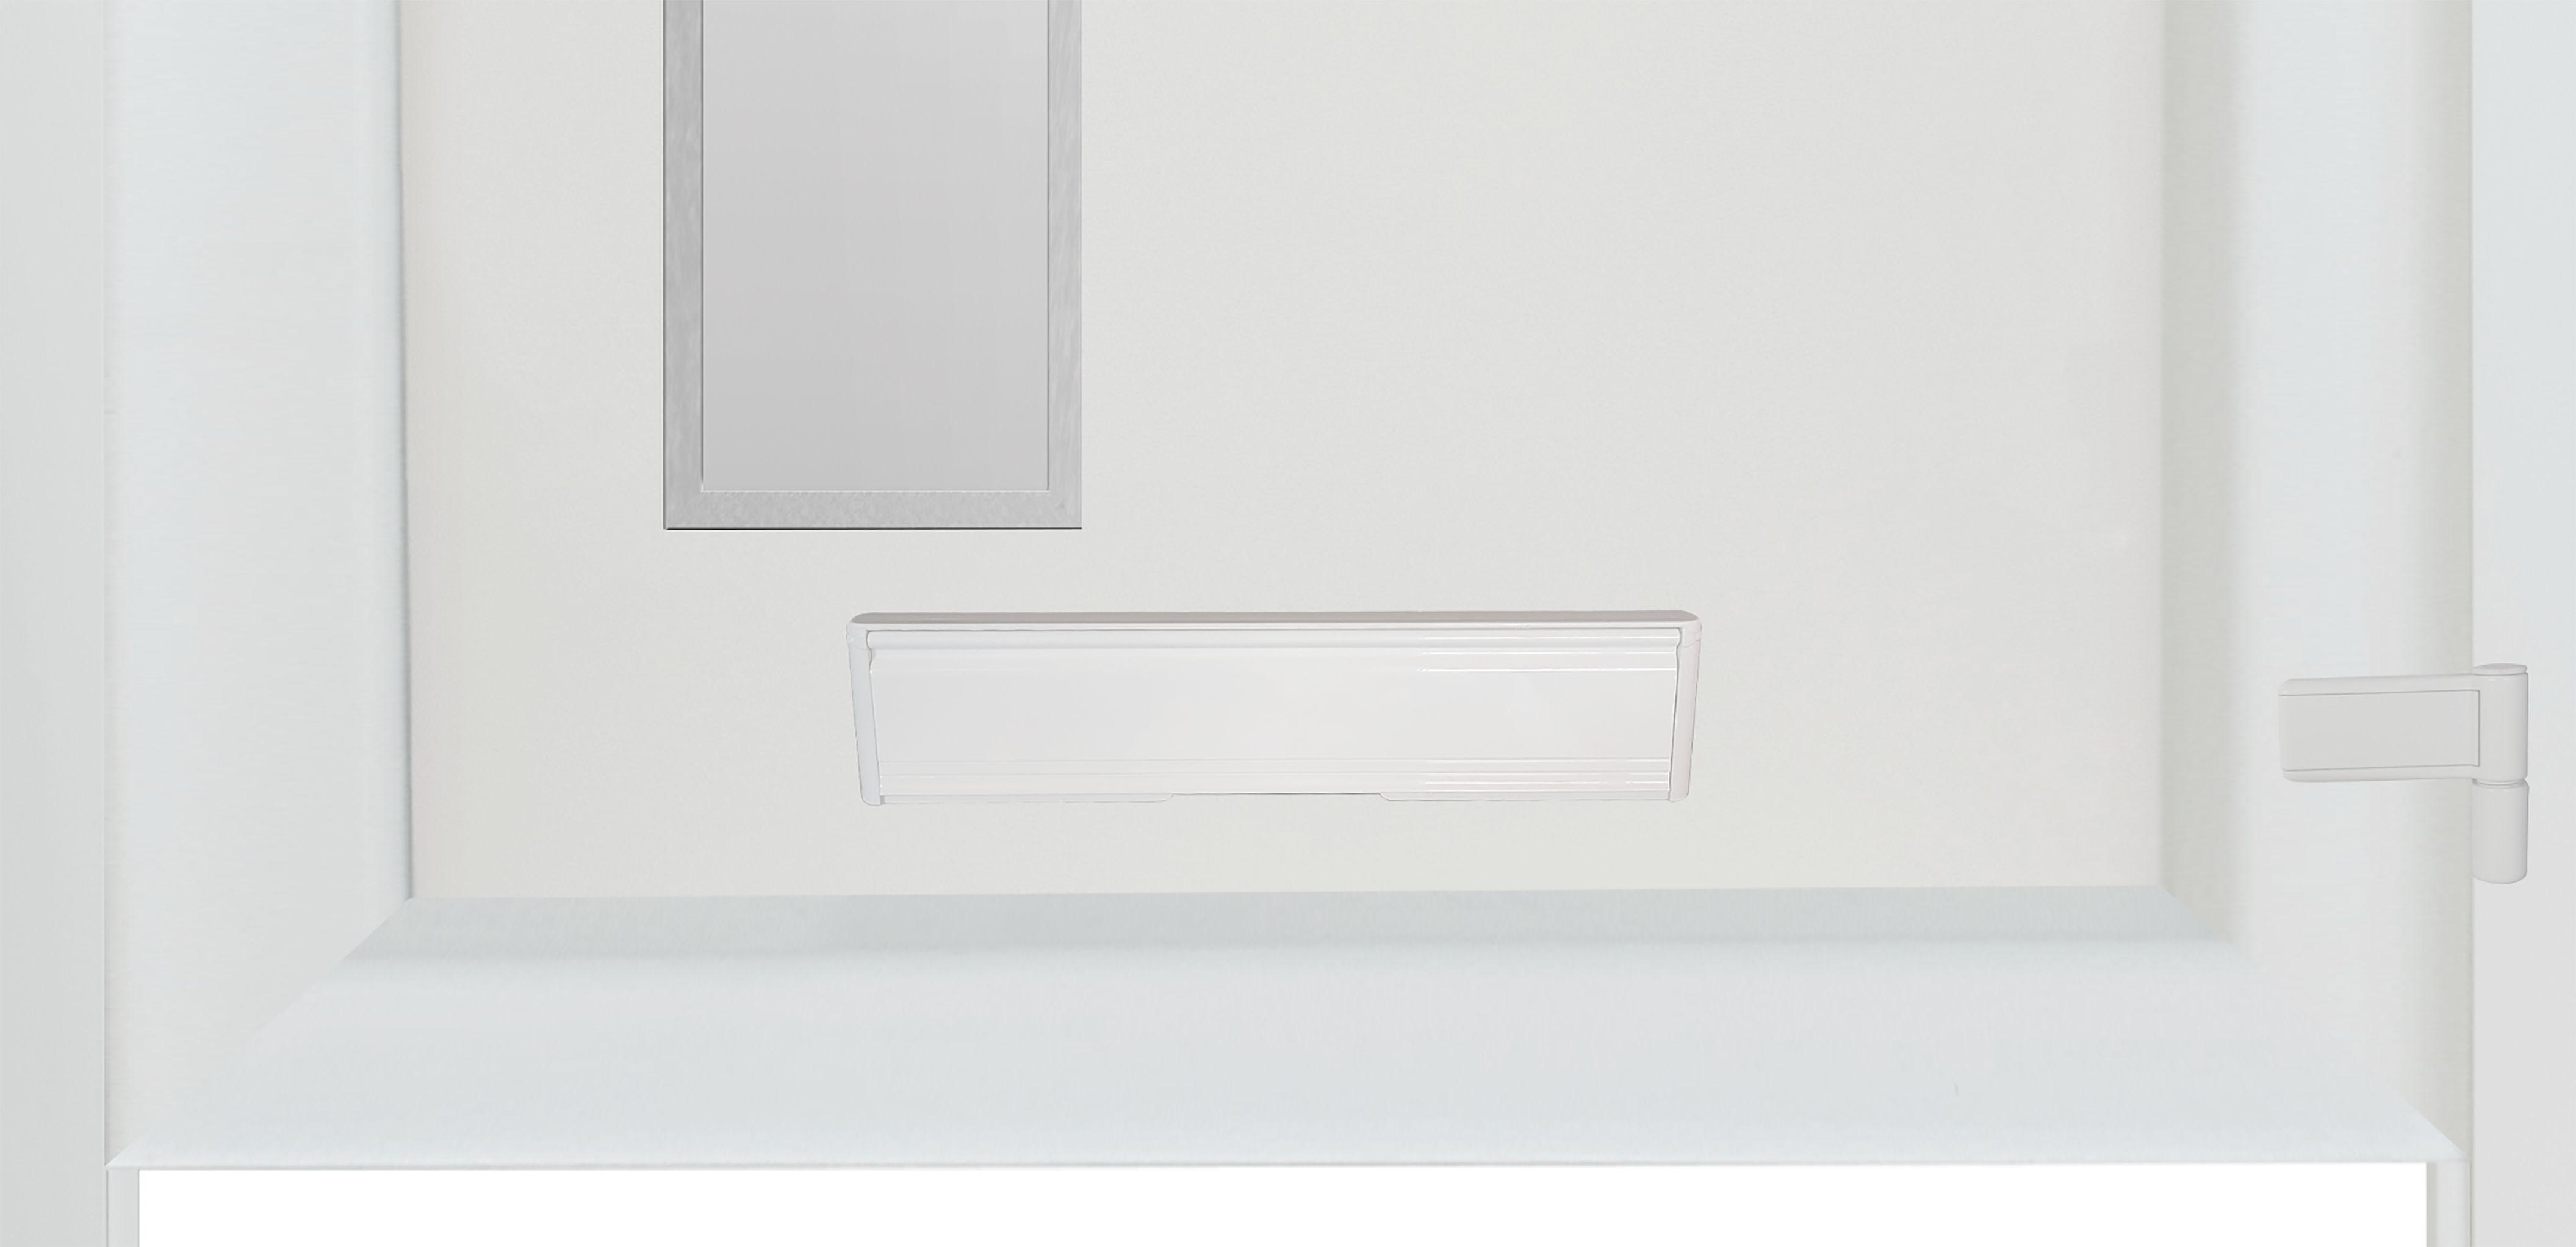 Fortia Kilifi Frosted Glazed Antracite LH External Front Door set, (H)2085mm (W)920mm